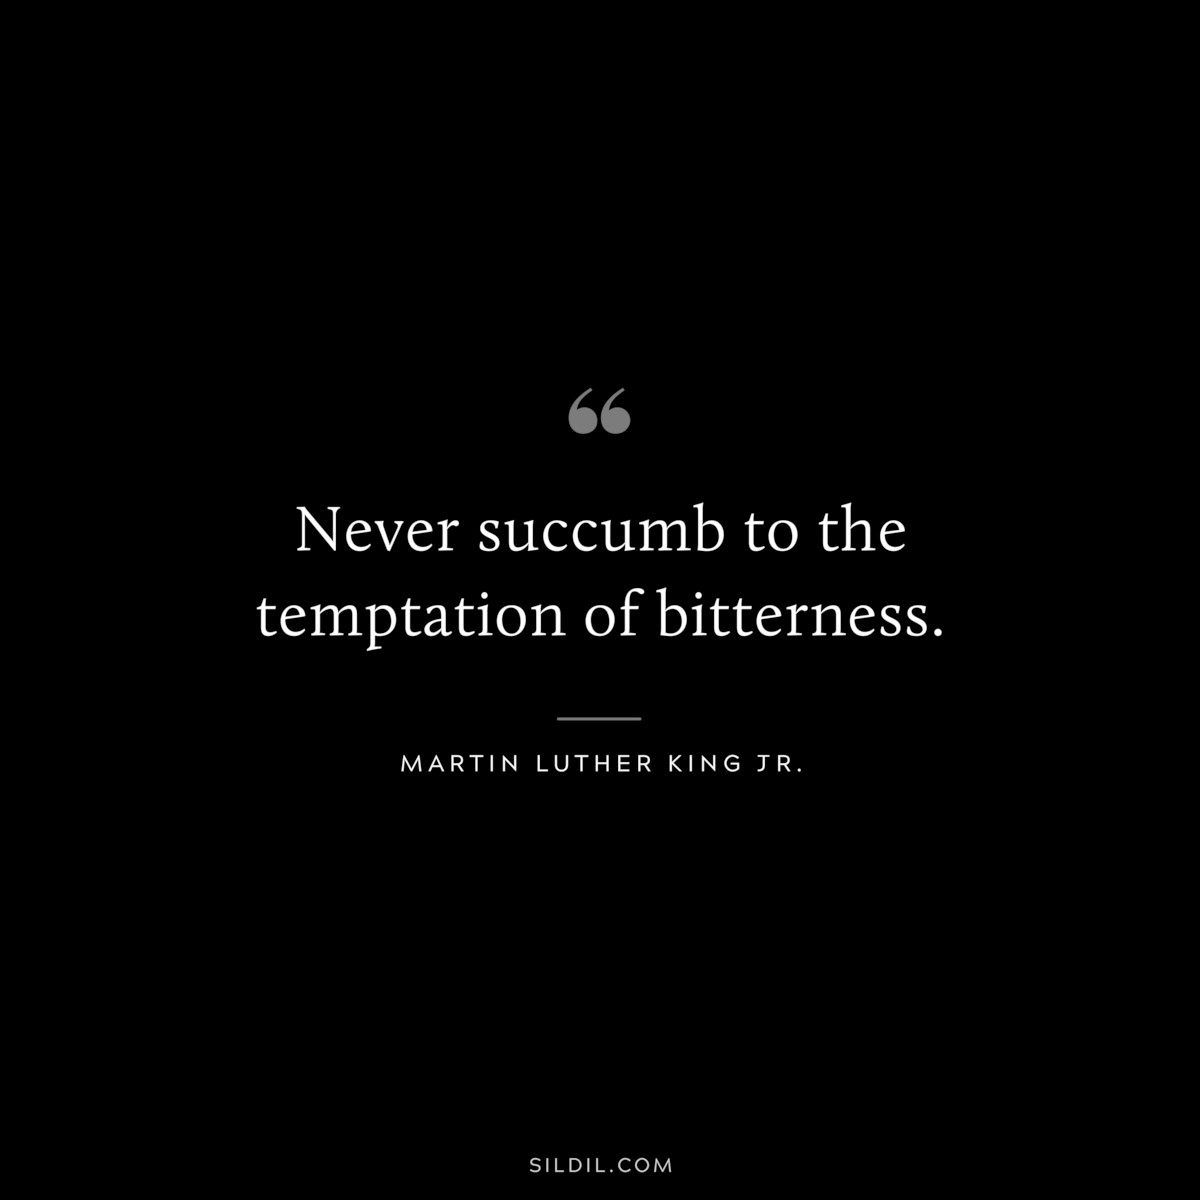 Never succumb to the temptation of bitterness. ― Martin Luther King Jr.